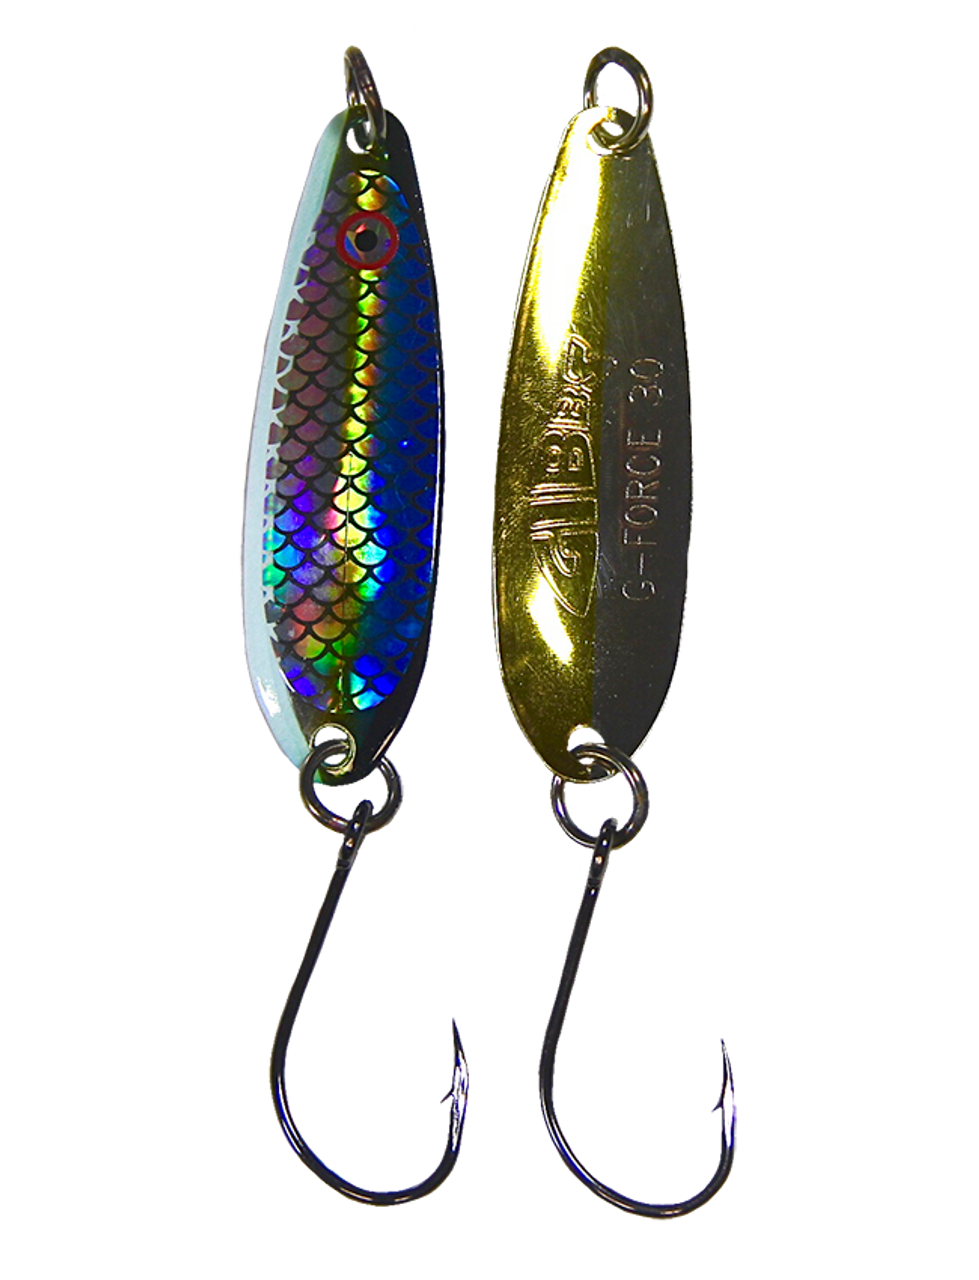 Gibbs Delta G Force Spoon - Gold Nugget Herring Aid - The Harbour